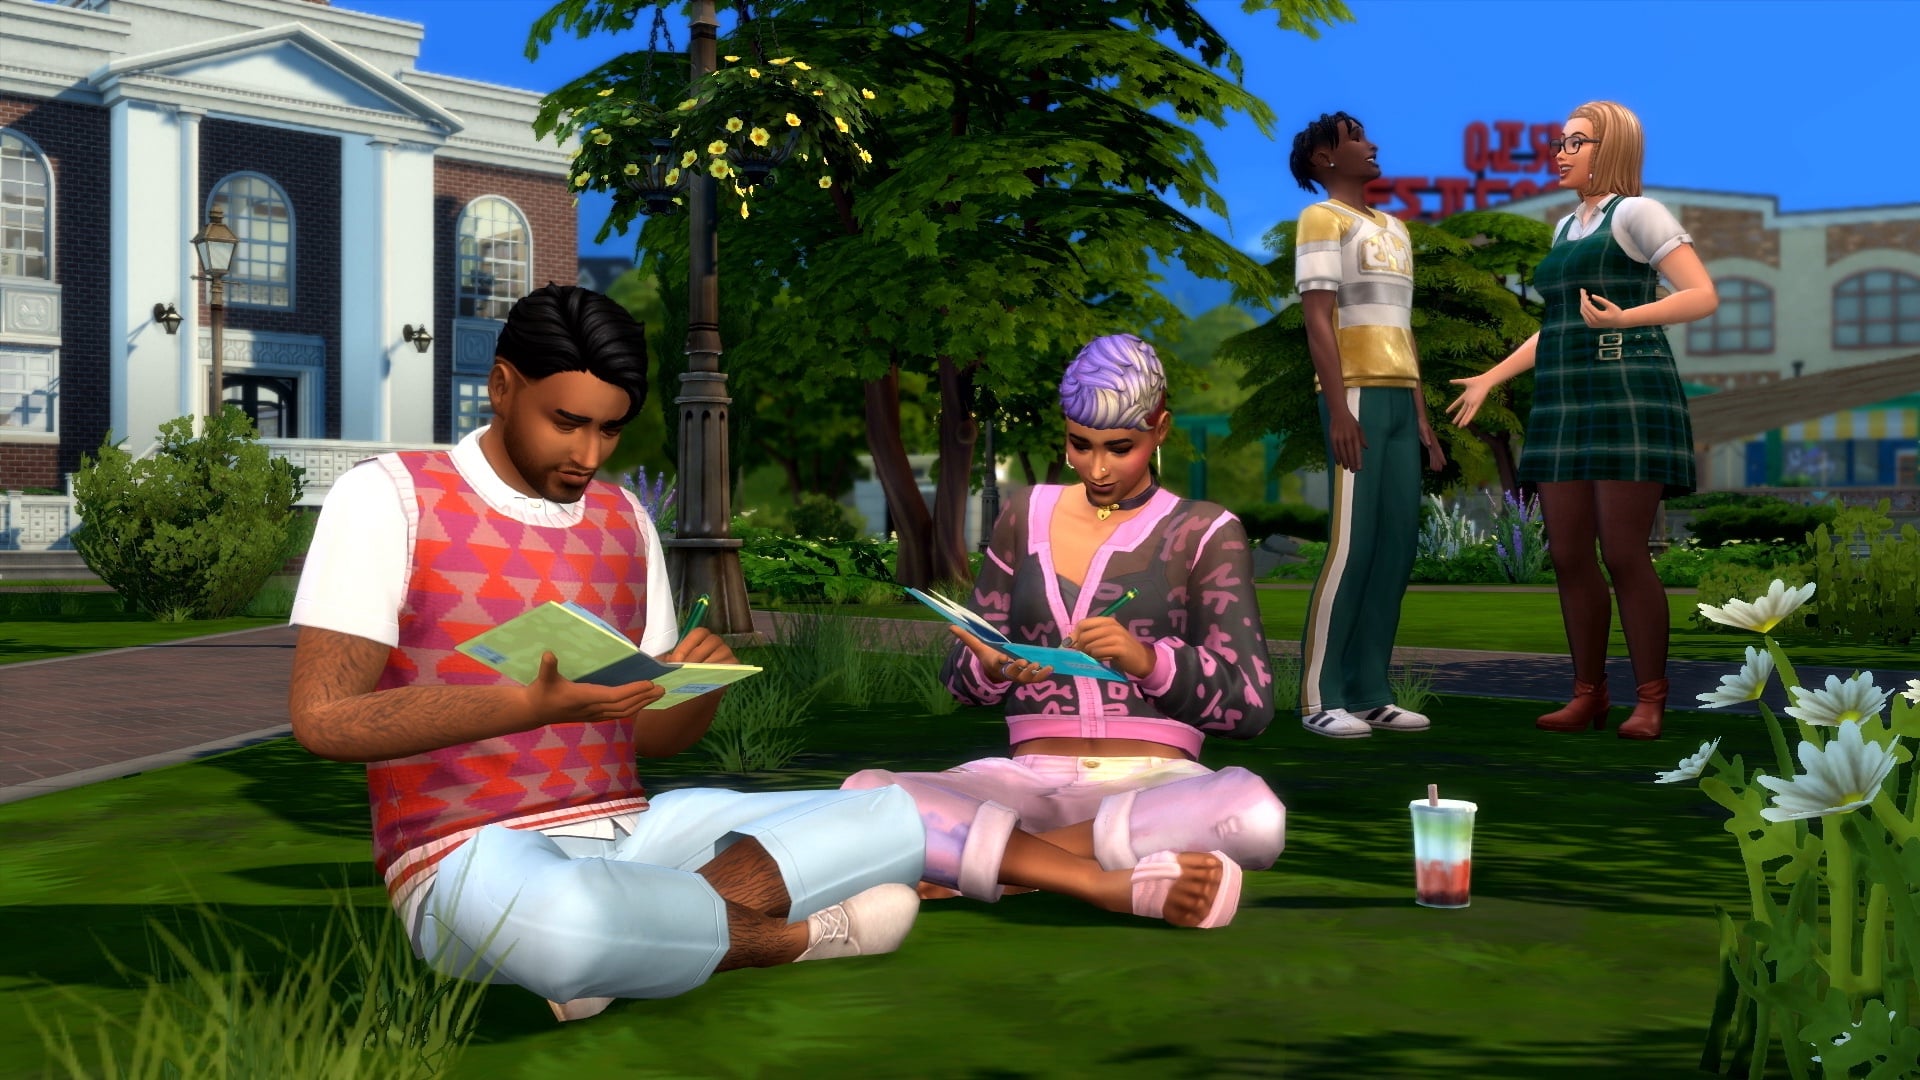 The Sims 4 Base Game Is Going To Be Free (Forever!)